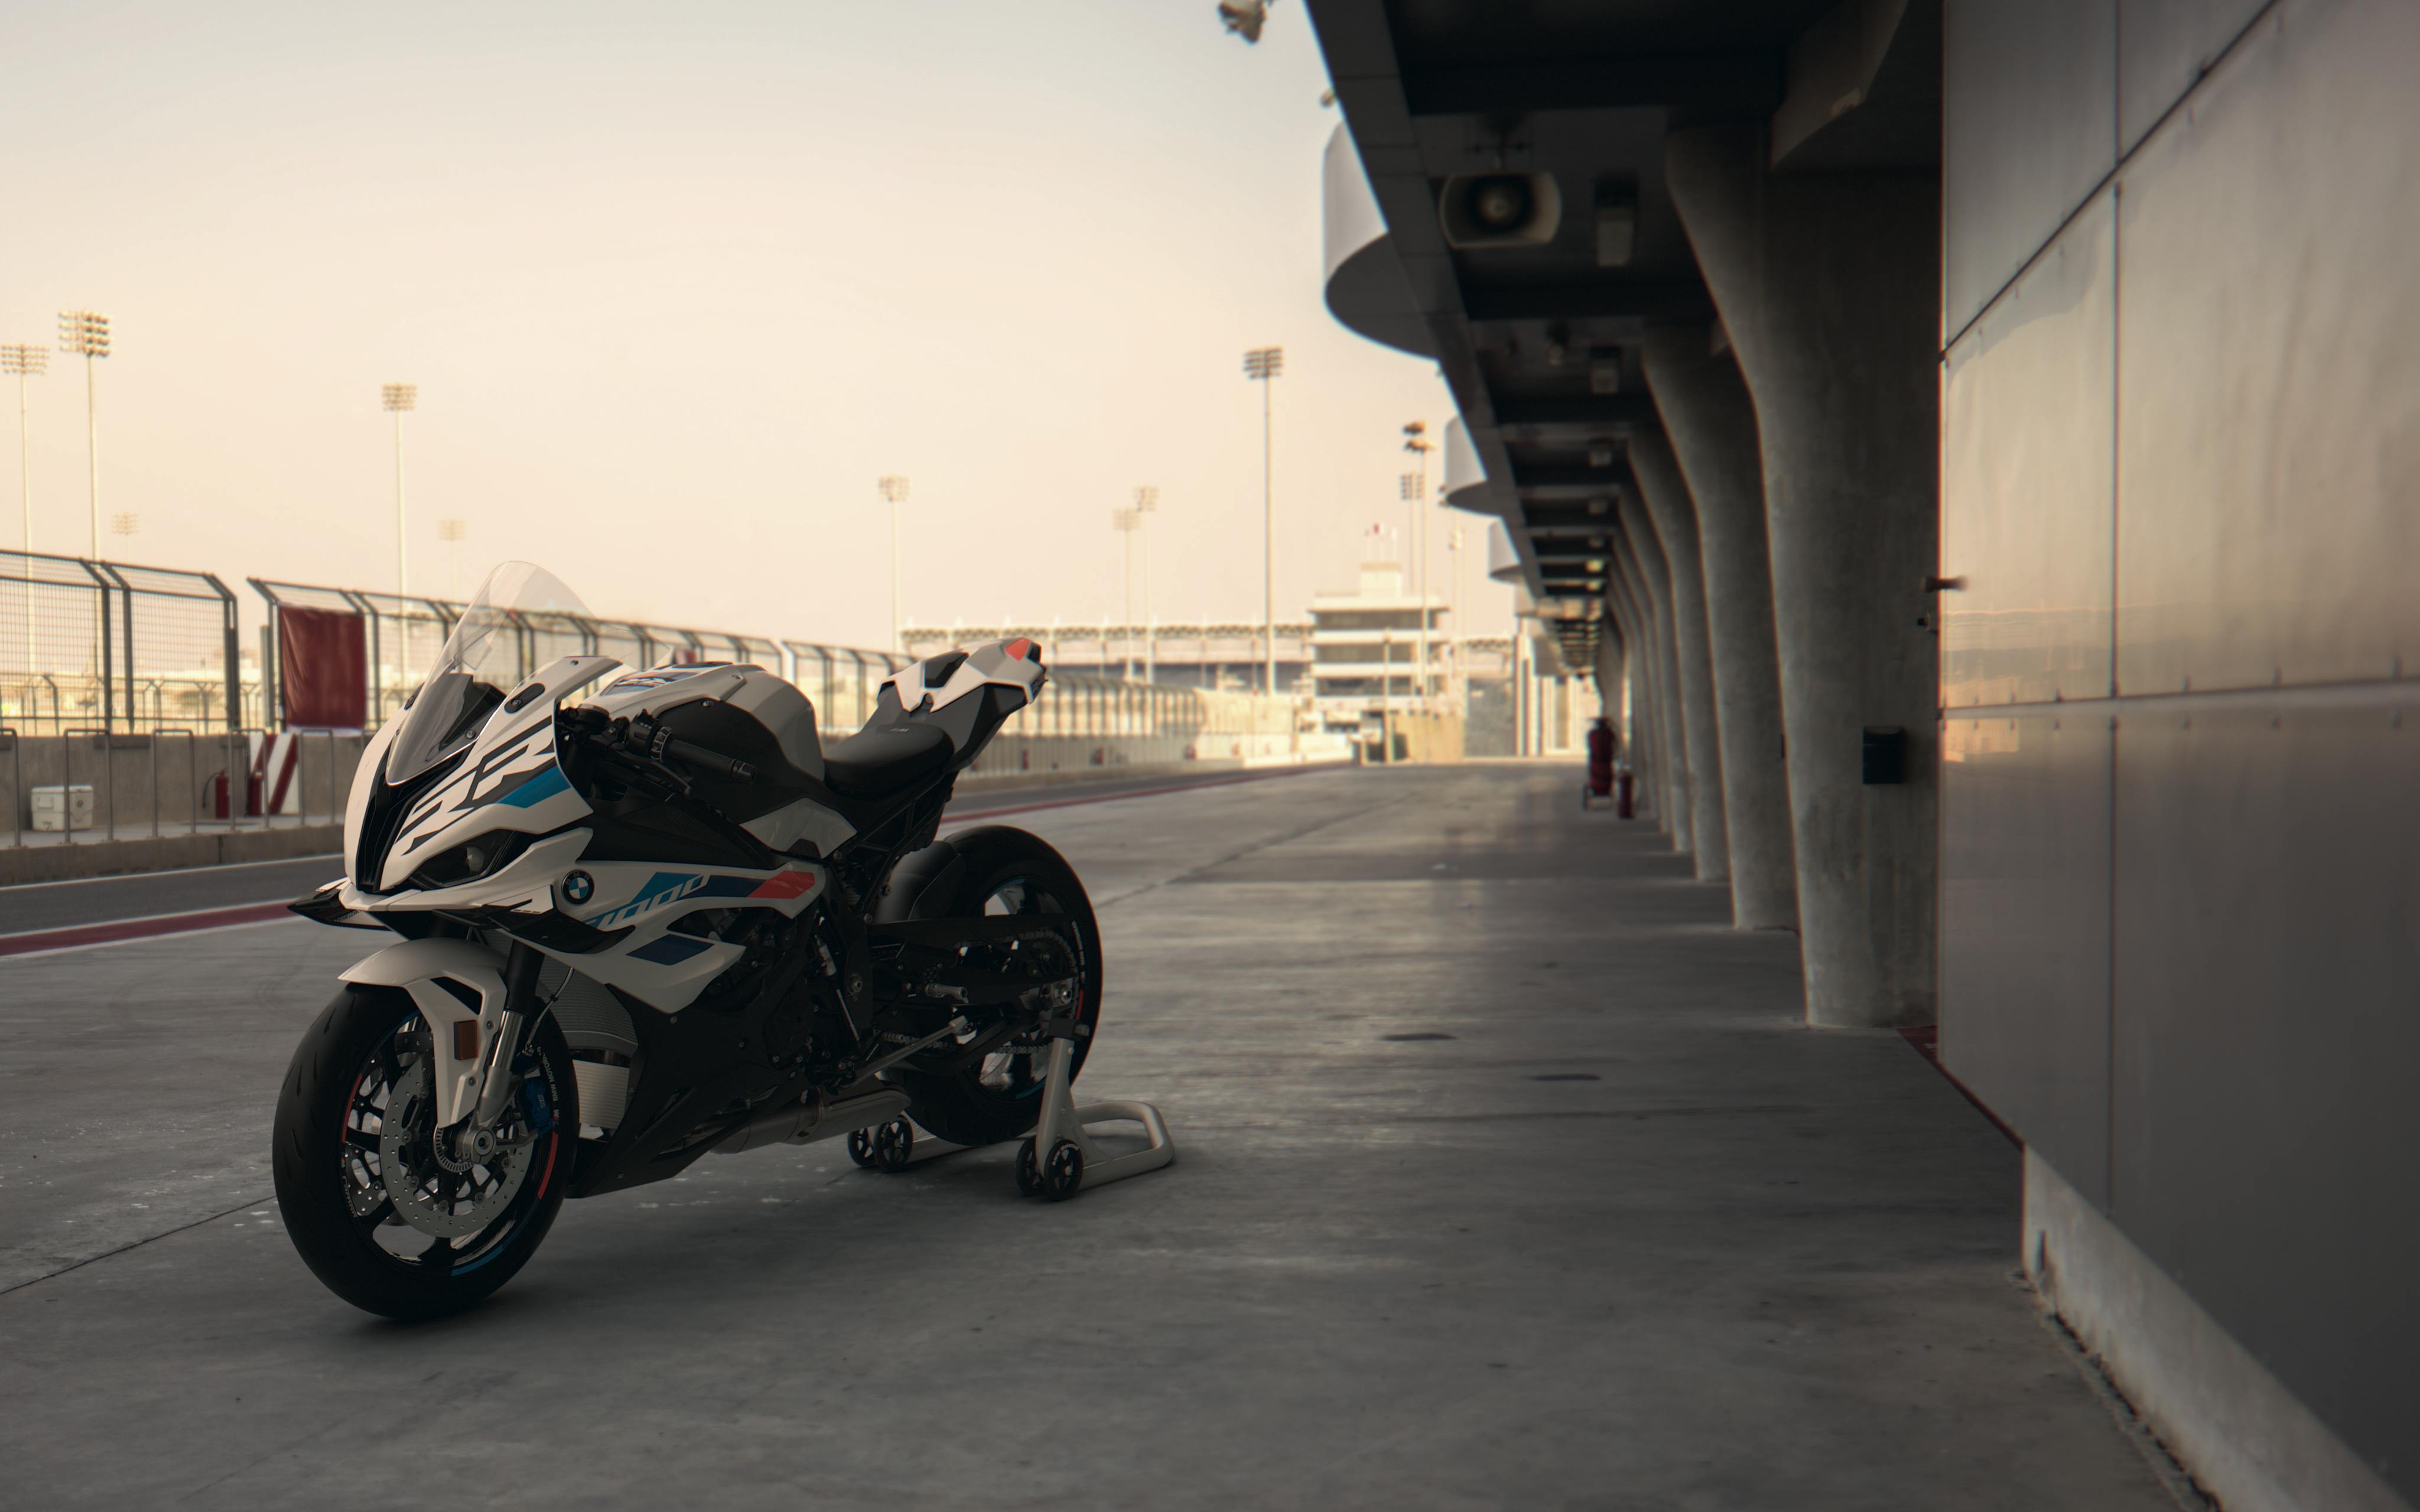 BMW S 1000 RR, parked